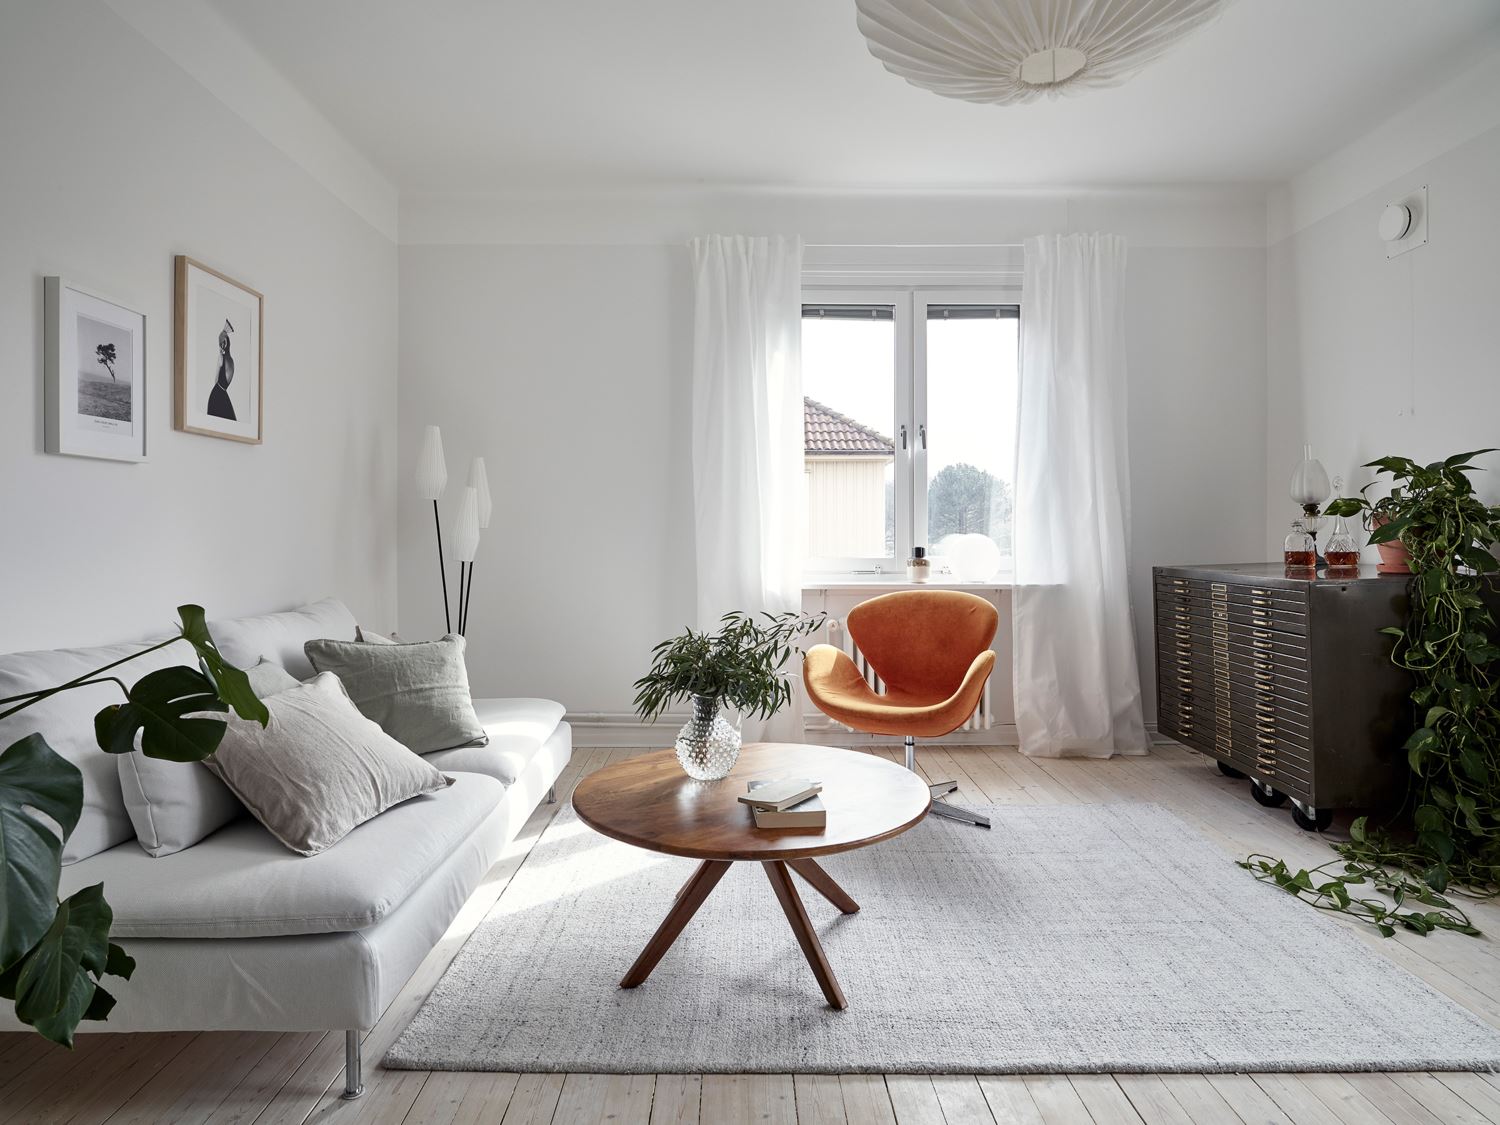 Fresh and minimal home with a vintage touch - COCO LAPINE DESIGNCOCO